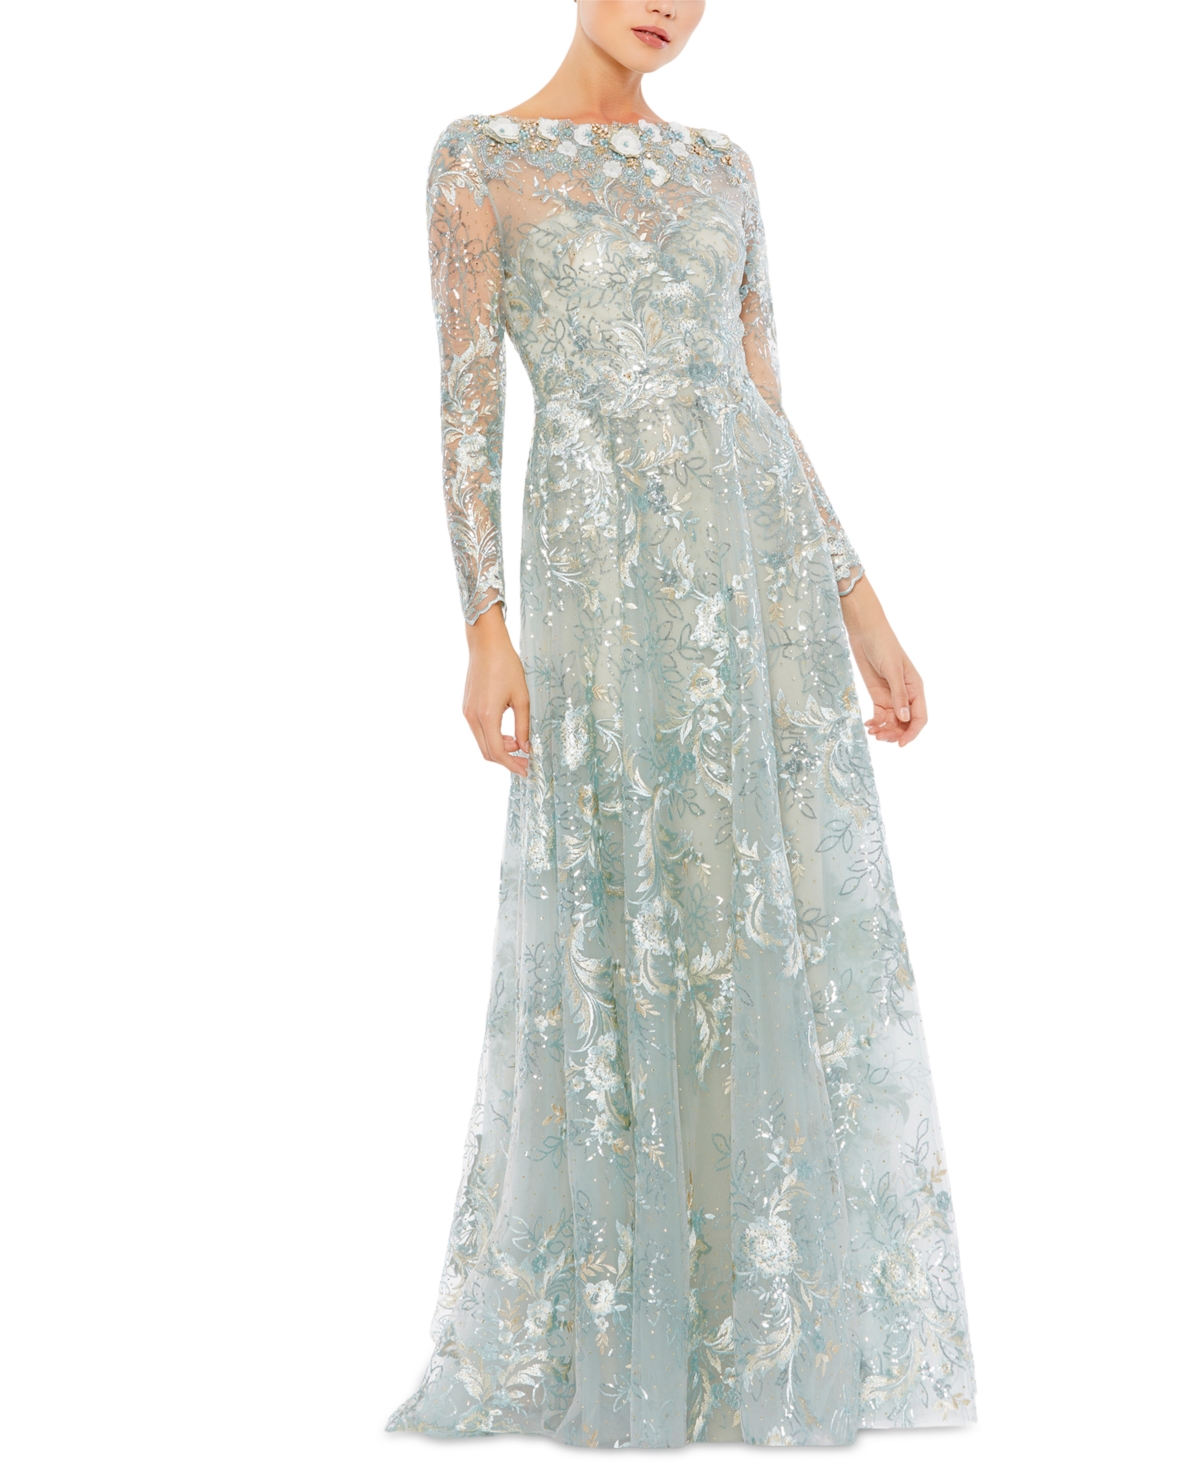 MAC DUGGAL WOMEN'S FLORAL EMBROIDERED ILLUSION LONG SLEEVE GOWN